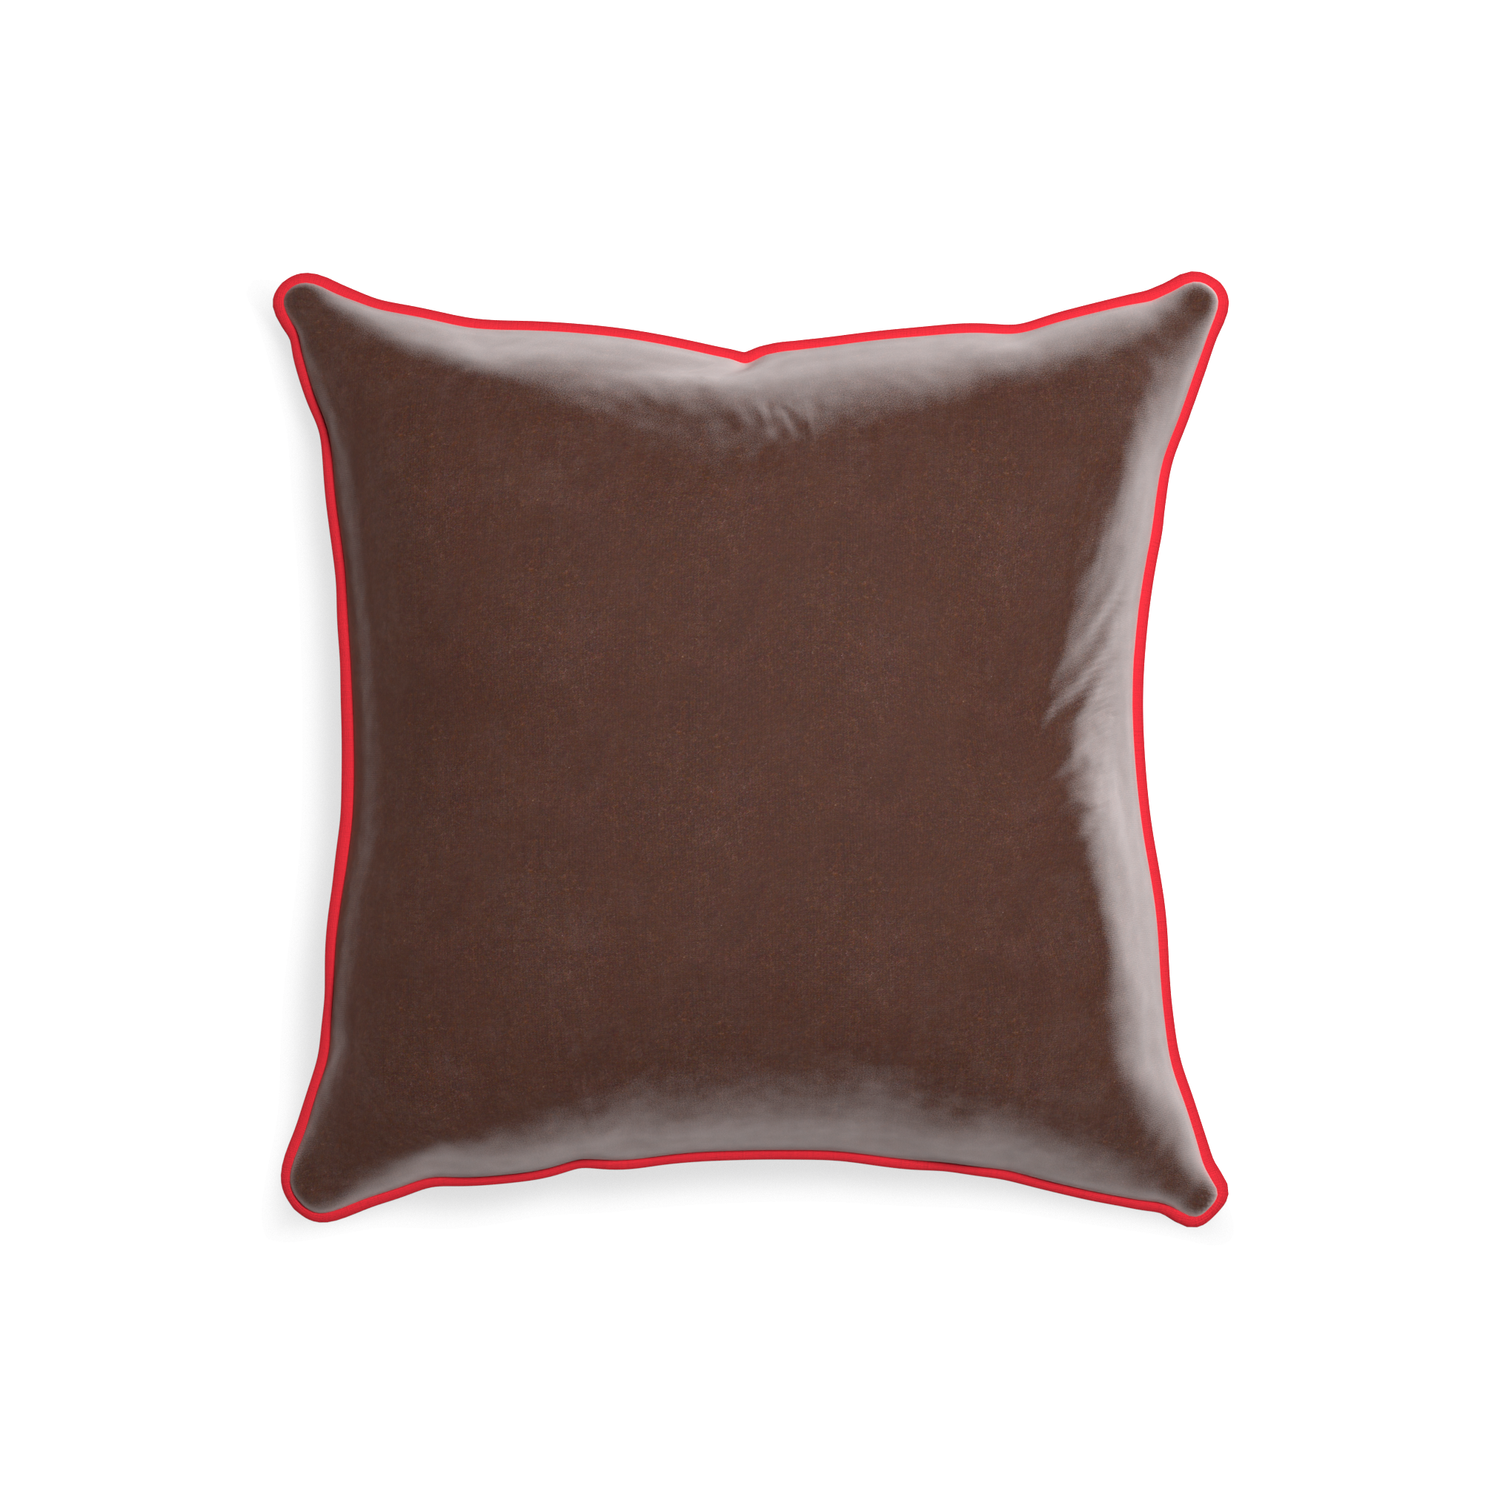 20-square walnut velvet custom pillow with cherry piping on white background